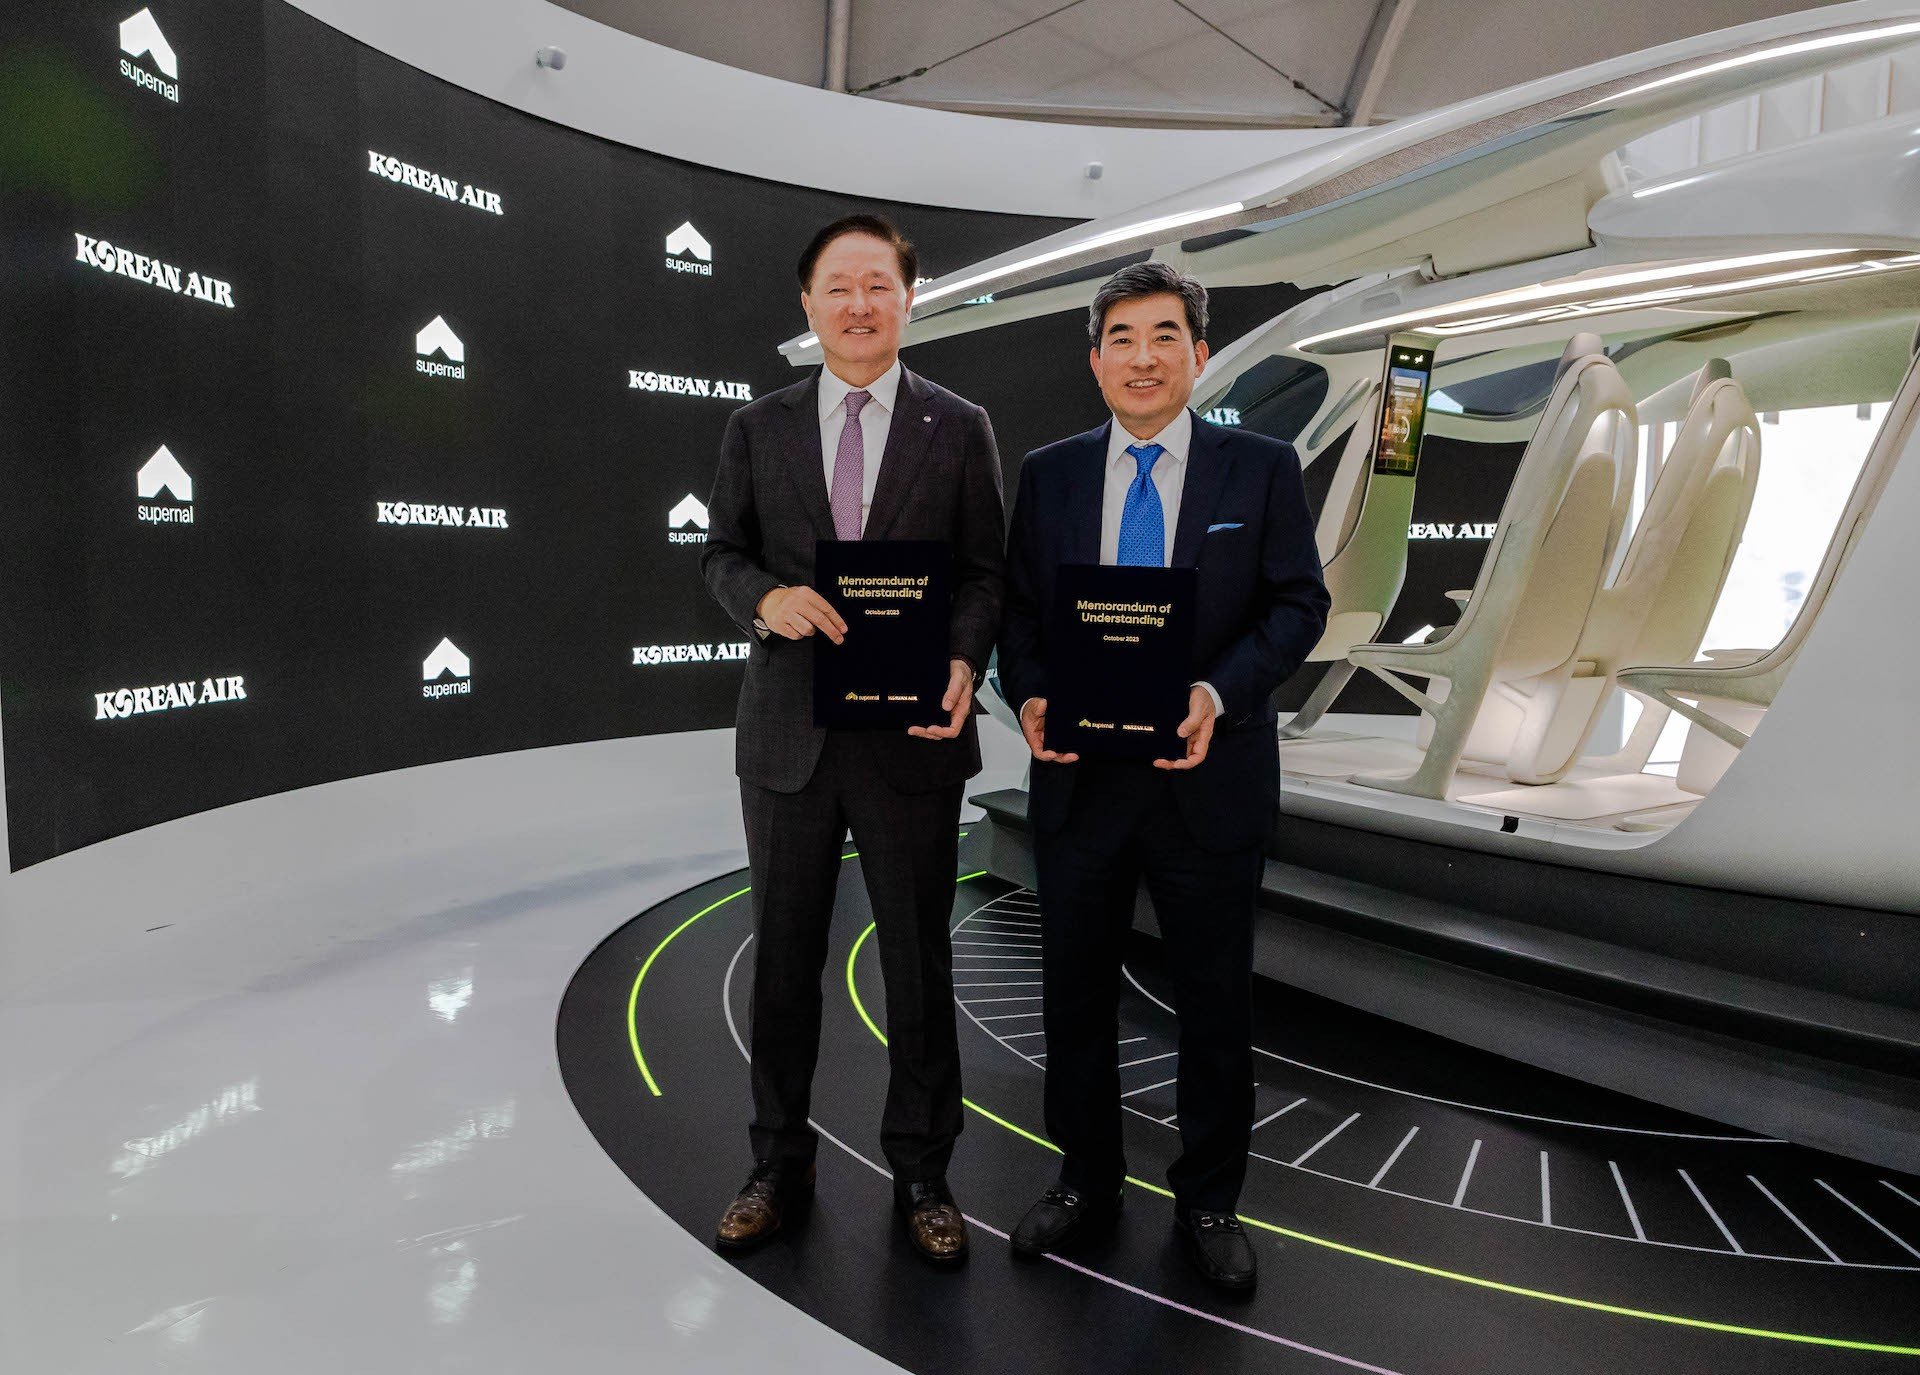 Supernal, Hyundai Motor Group’s Advanced Air Mobility (AAM) company, has announced a strategic partnership with Korean Air to help accelerate the design of an electric vertical takeoff and landing (eVTOL) vehicle and the development of the AAM ecosystem in Korea.